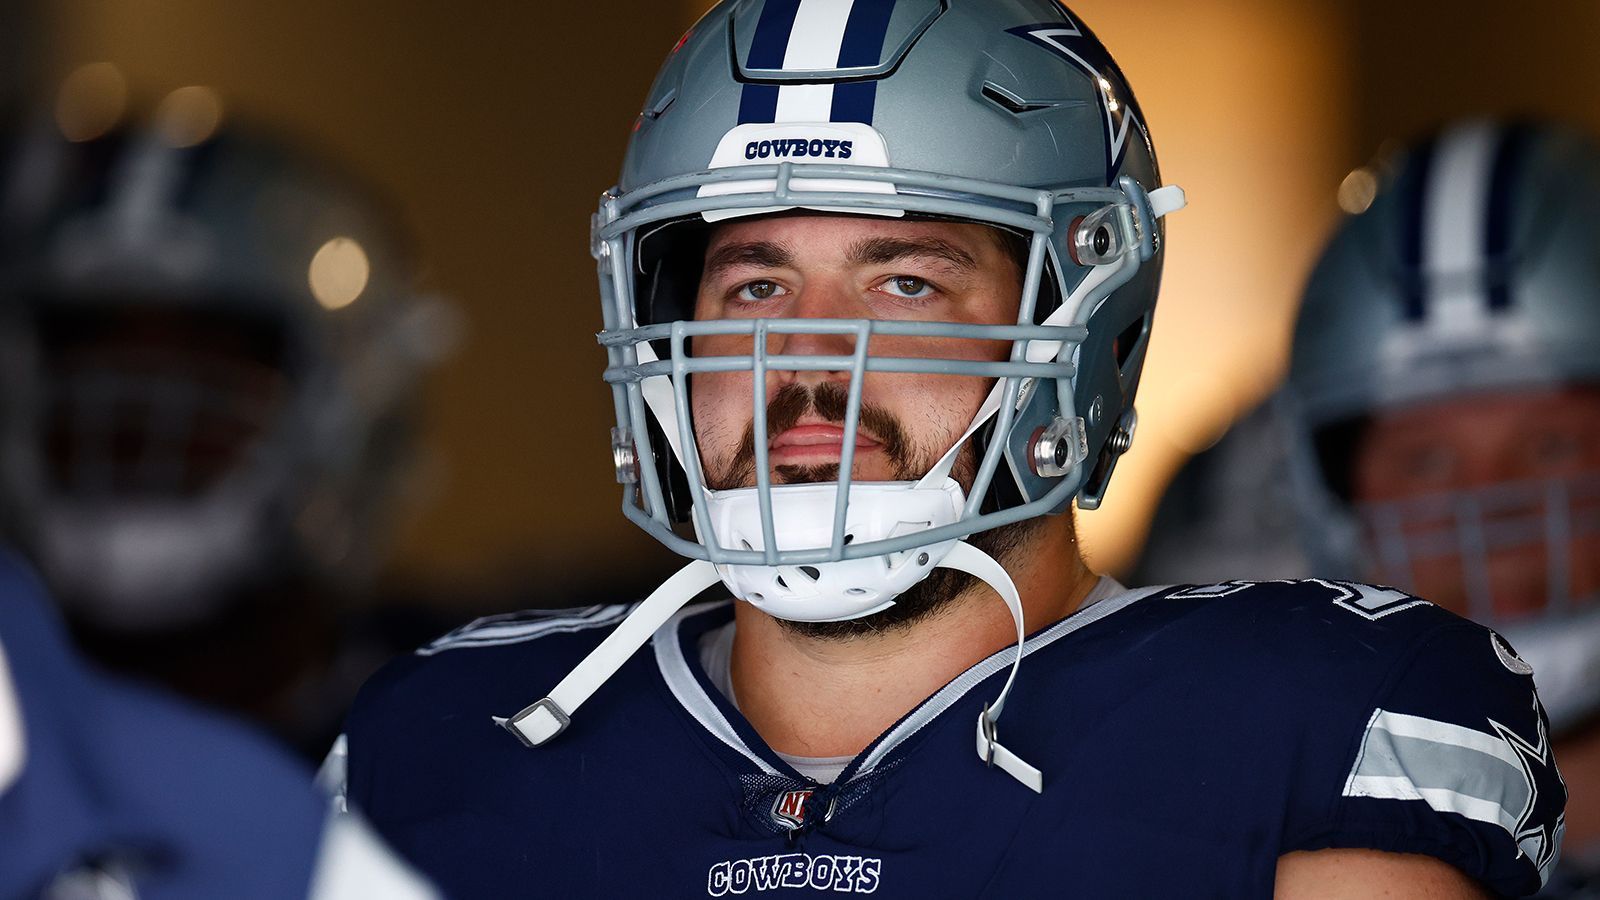 
                <strong>Right Guard: Zack Martin</strong><br>
                &#x2022; Aktuelle Franchise: Dallas Cowboys<br>&#x2022; In der NFL seit: 2014<br>
              